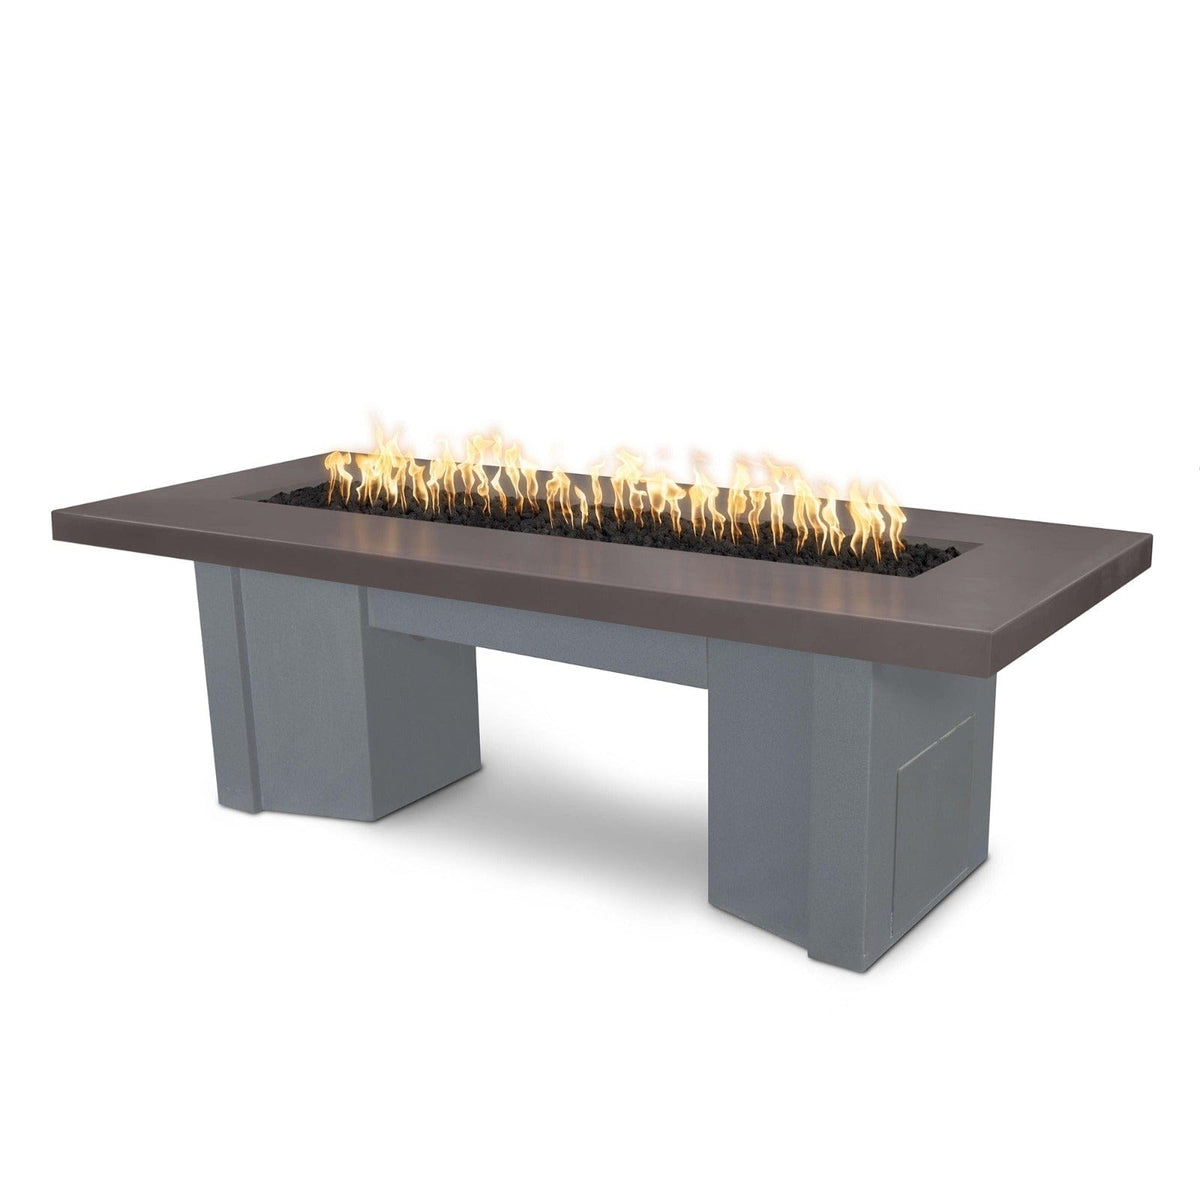 The Outdoor Plus Fire Features Chestnut (-CST) / Gray Powder Coated Steel (-GRY) The Outdoor Plus 78&quot; Alameda Fire Table Smooth Concrete in Liquid Propane - Match Lit / OPT-ALMGFRC78-LP